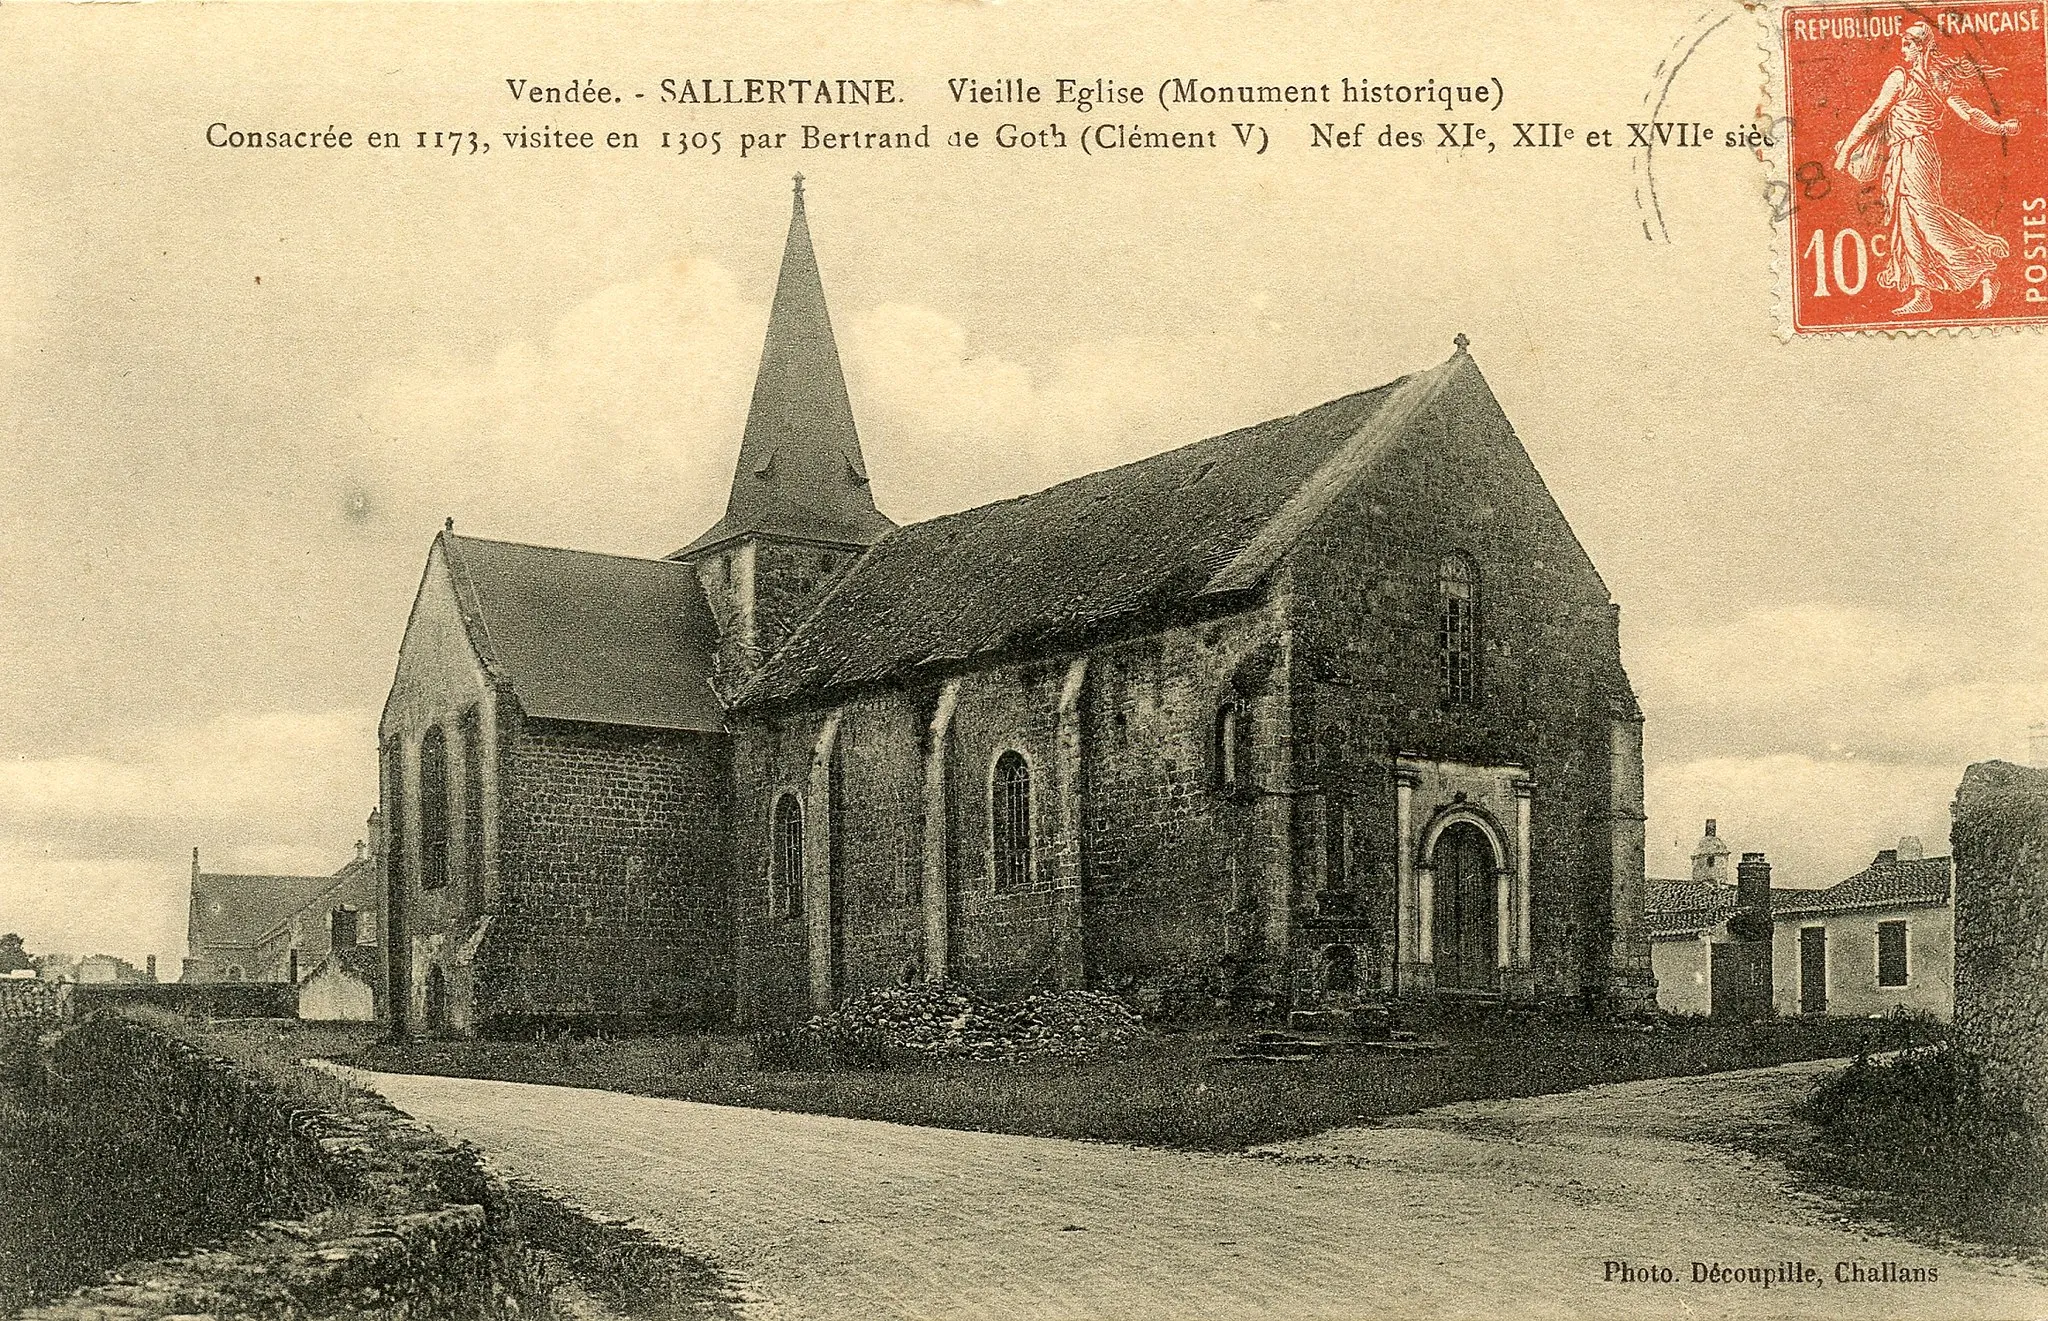 Photo showing: Postcard of the ancient church at Sallertaine, department of Vendée, in France. Photo. Découpille, Challans. Posted in 1912. Collotype.